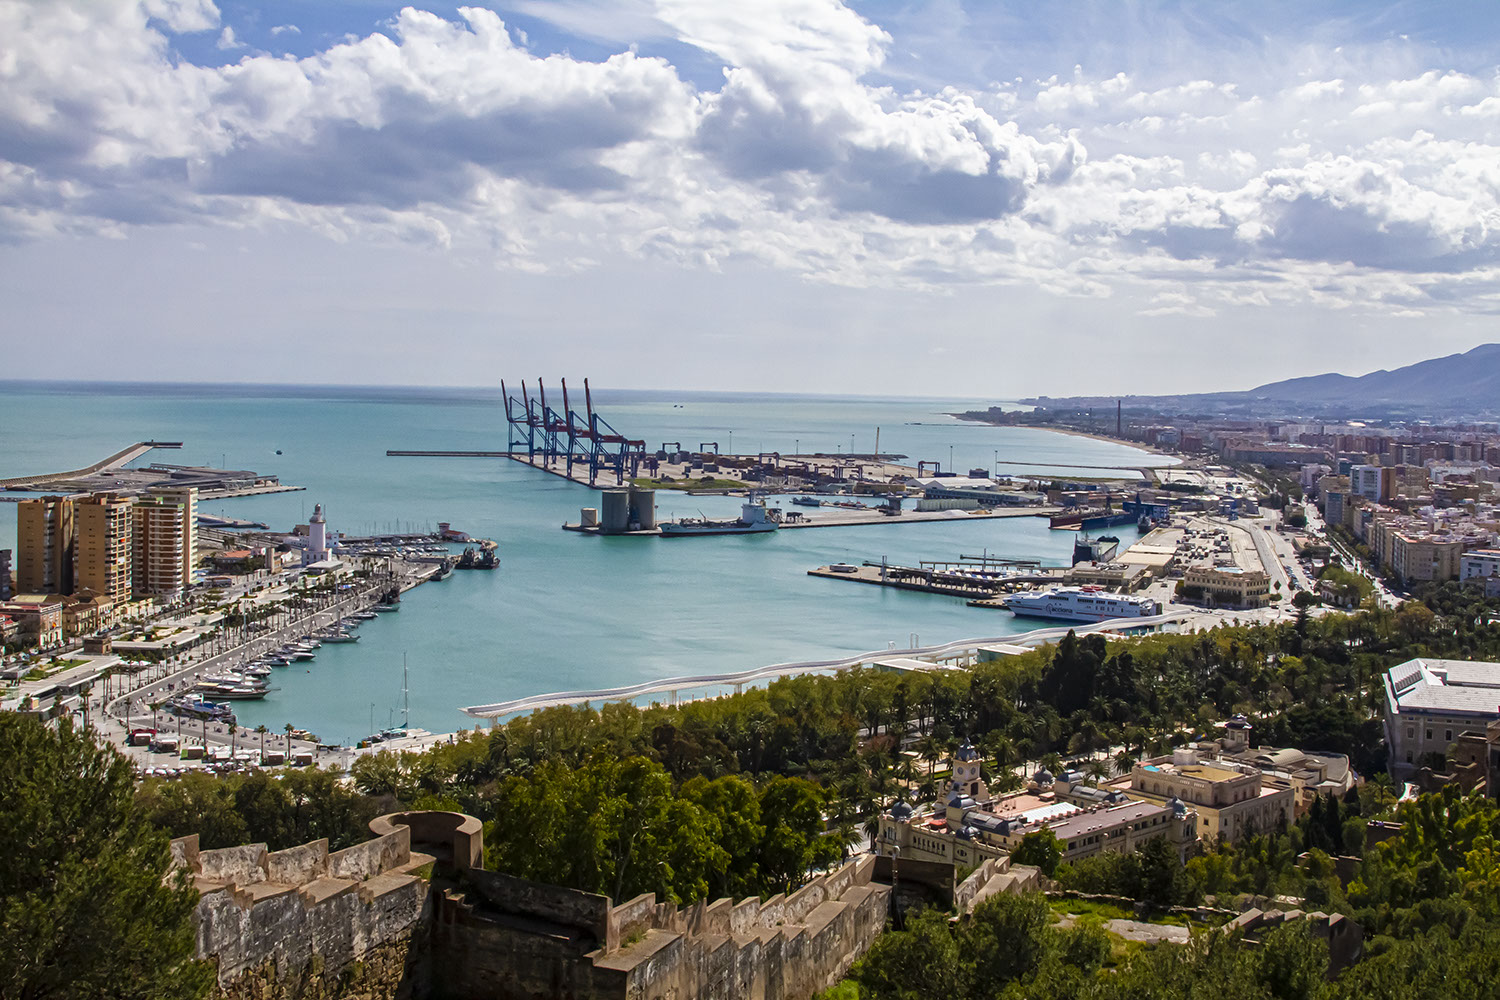 Spain, Port and Docks in Malaga, taken from the footpath to Monte Gibralfaro.